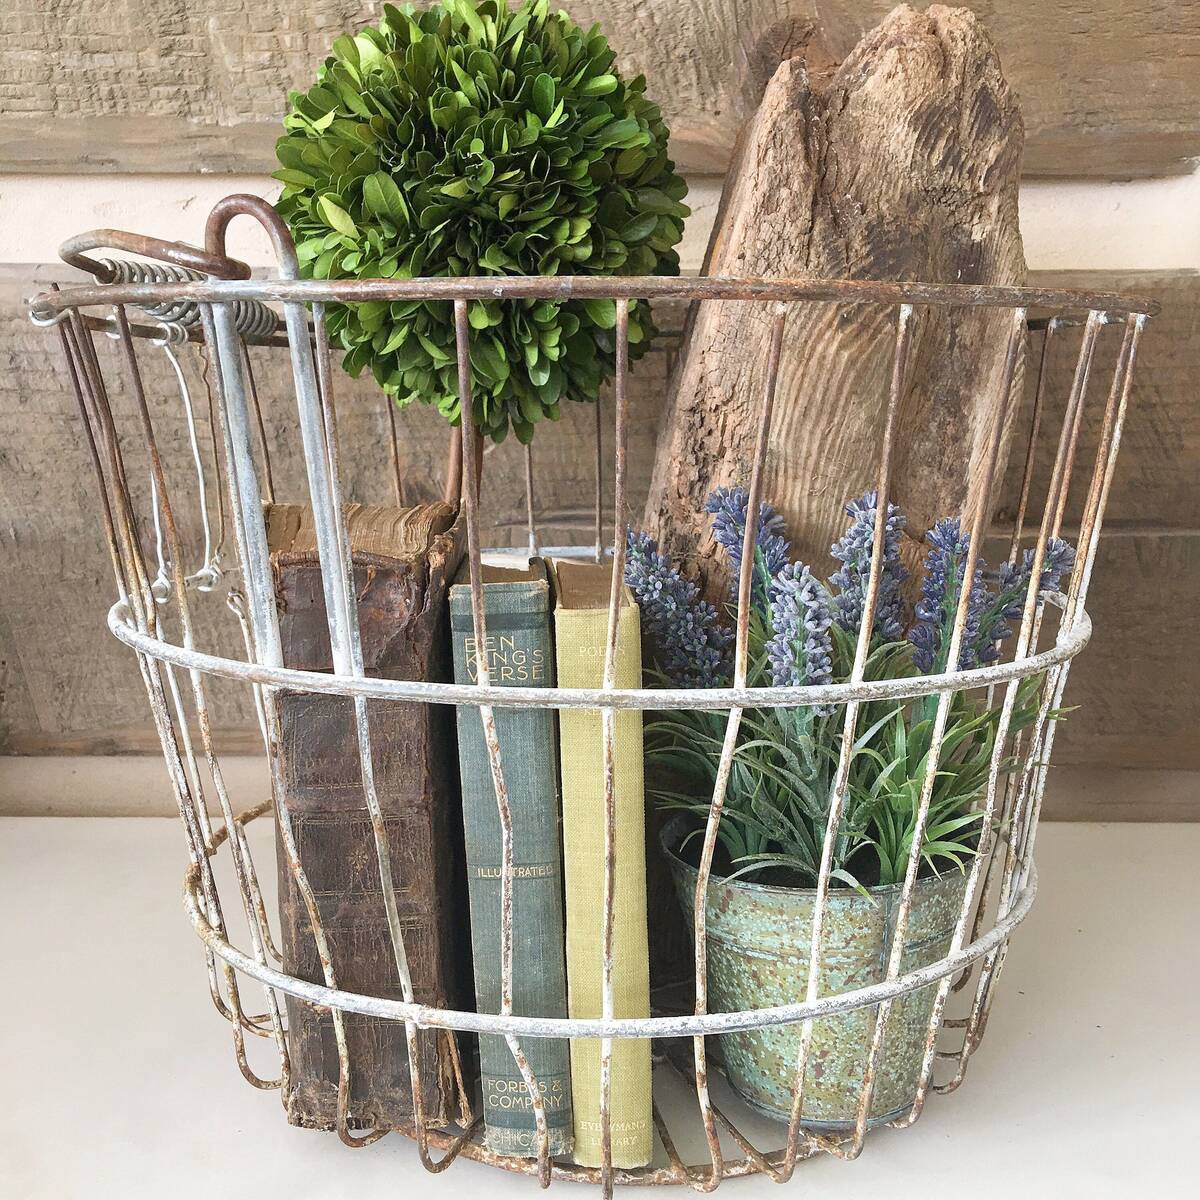 How To Decorate Wire Baskets